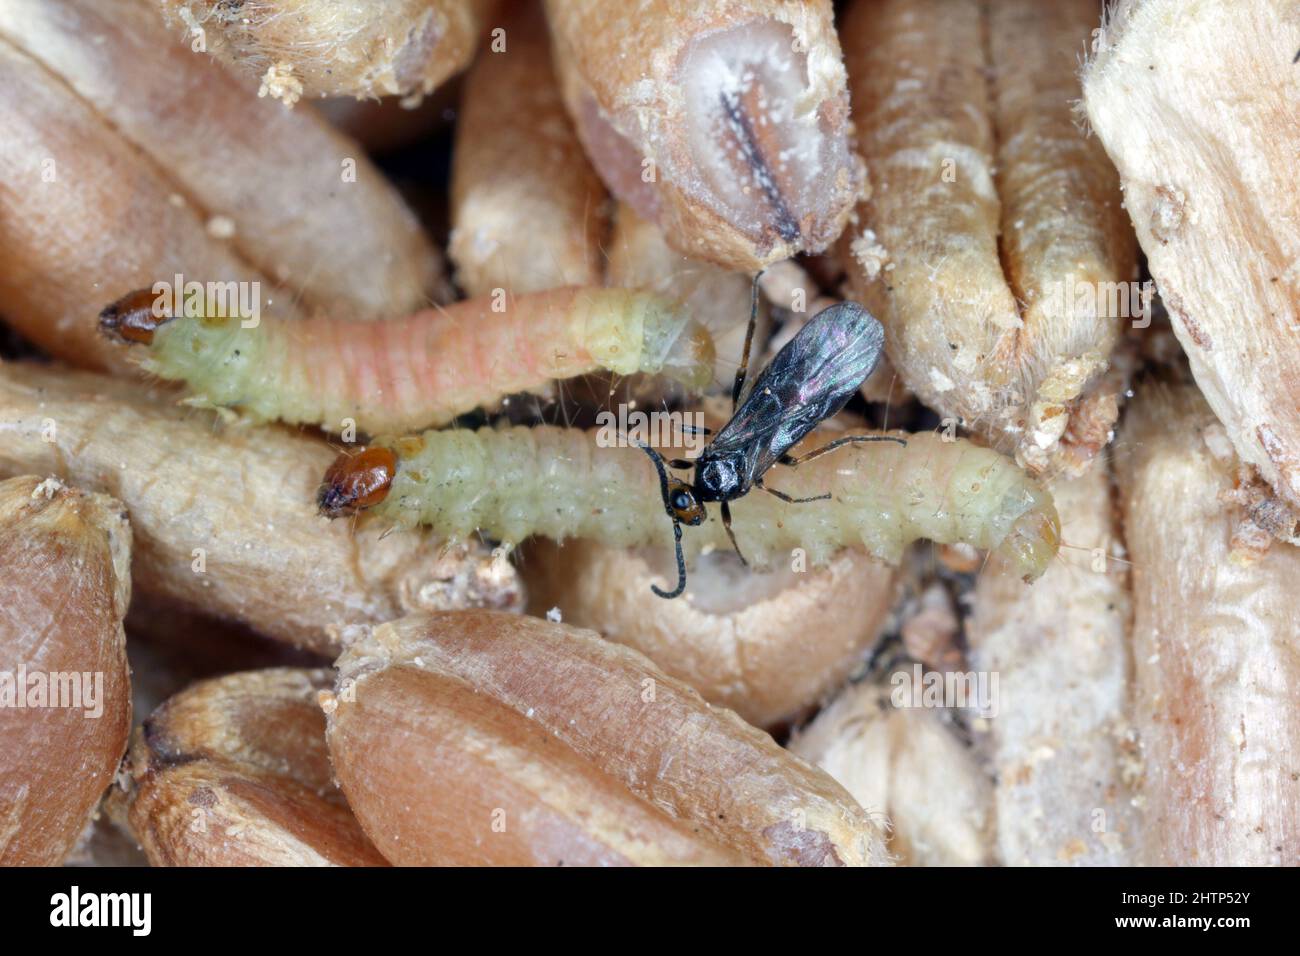 Habrobracon hebetor is a minute wasp of the family Braconidae that is an ectoparasitoid of Indianmeal moth (Plodia interpunctella). Stock Photo